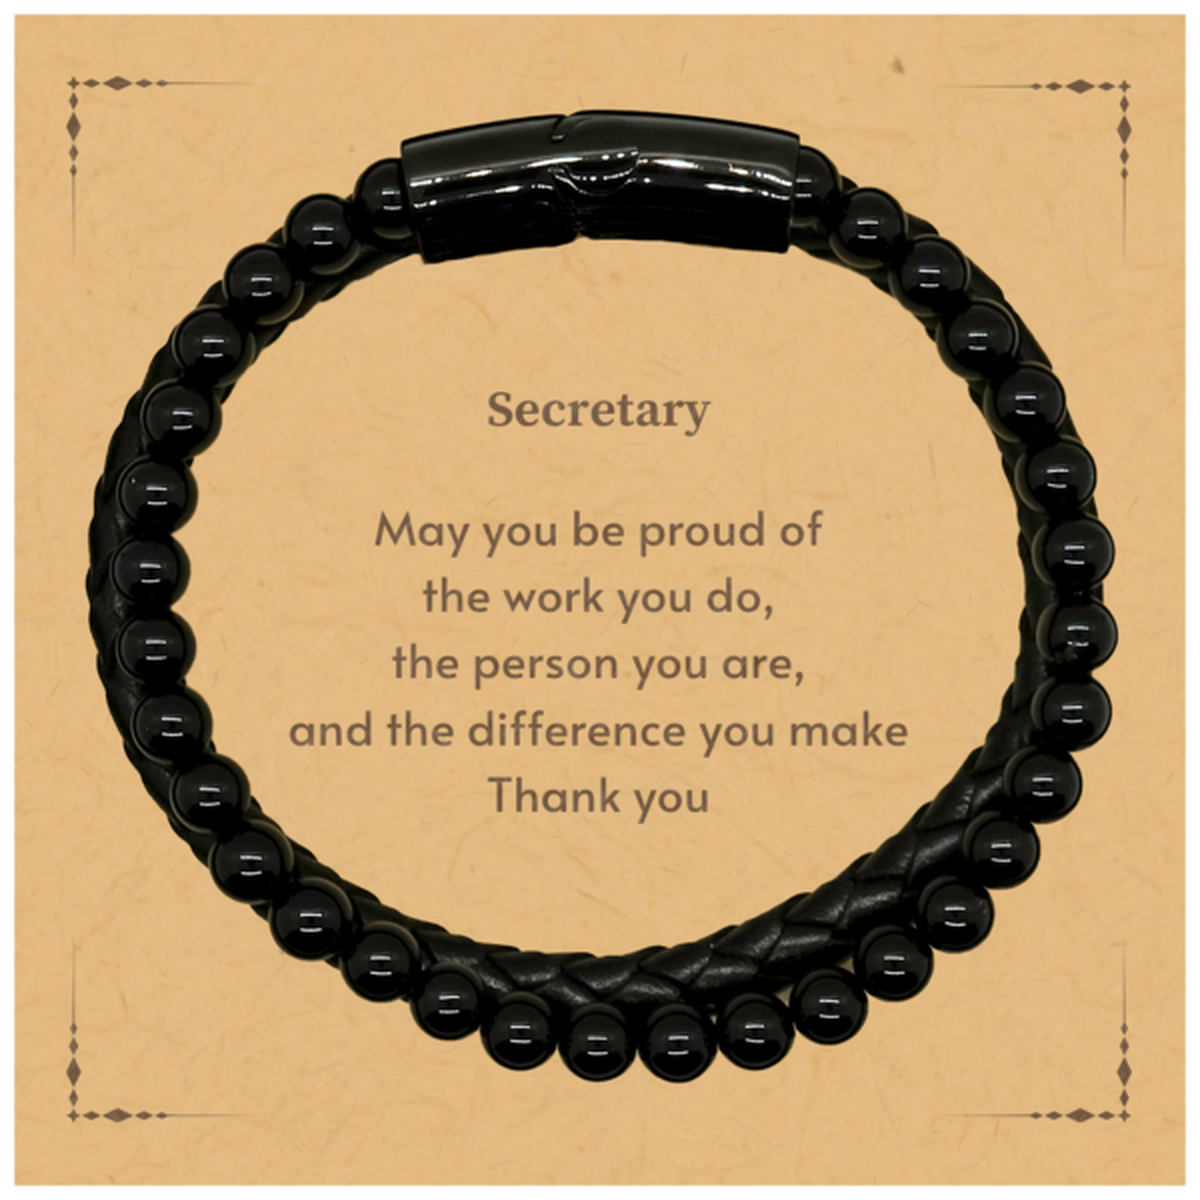 Heartwarming Stone Leather Bracelets Retirement Coworkers Gifts for Secretary, Secretary May You be proud of the work you do, the person you are Gifts for Boss Men Women Friends